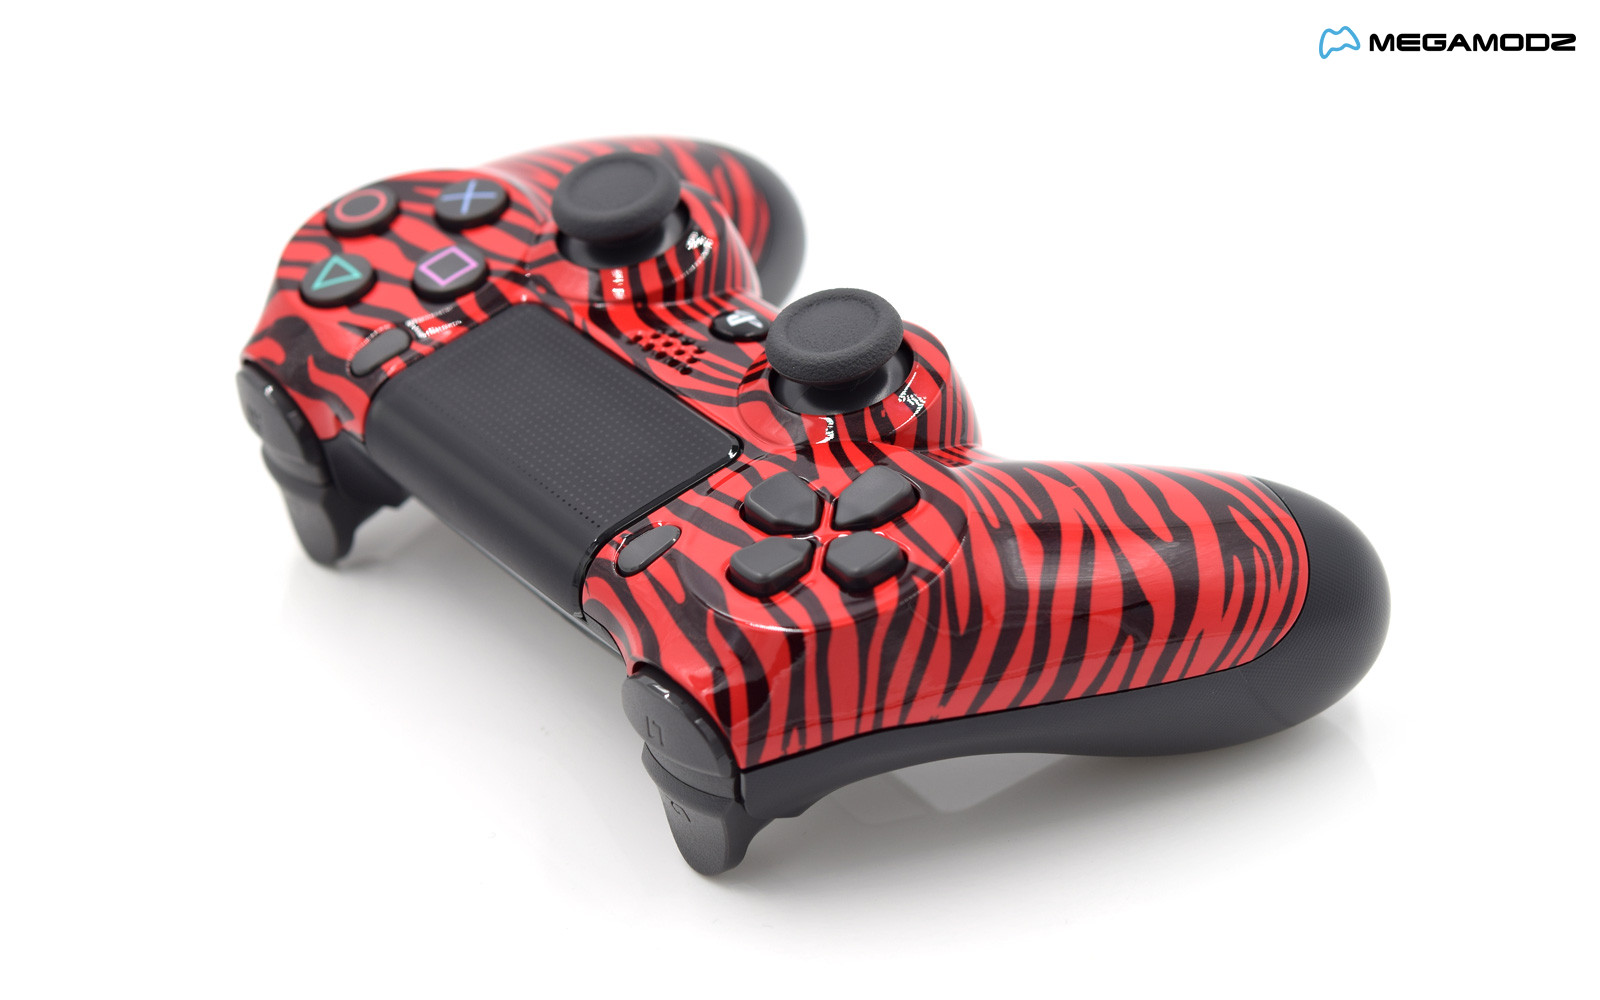 Modded PS4 Rapid Fire Controller - Red Tiger ... - 1600 x 1000 jpeg 200kB